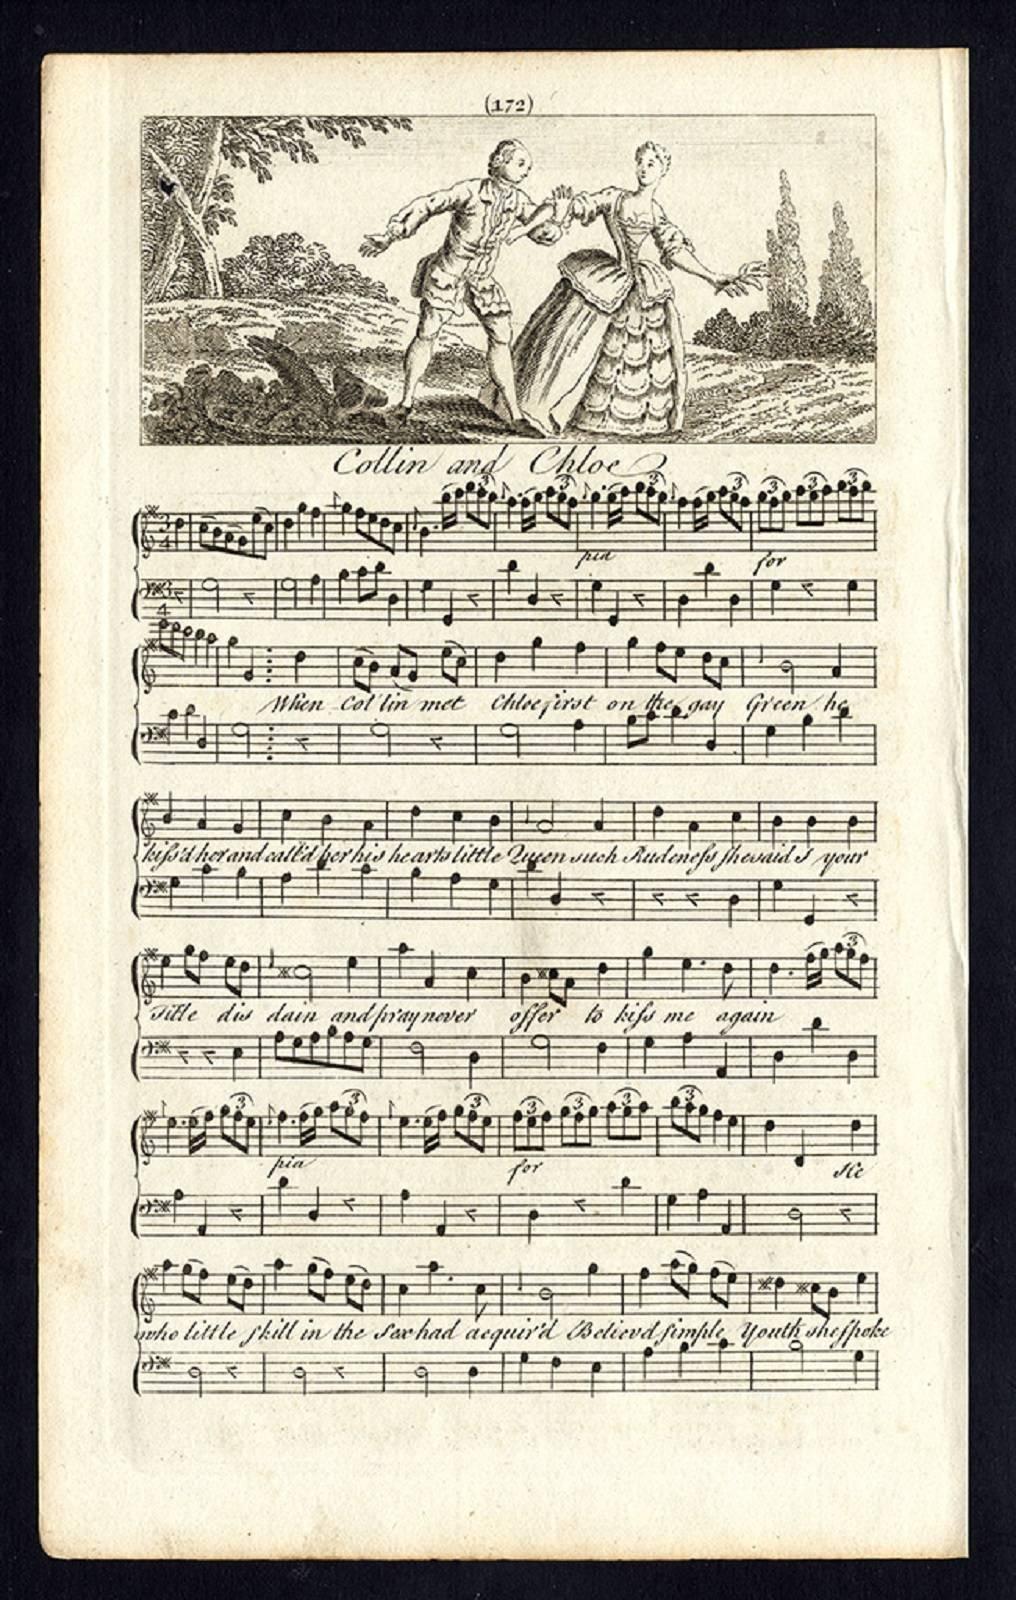 Original etching/engraving on a verge type paper.

This rare set of songs consists of four sheets, on which you will find the music of the following four songs: 